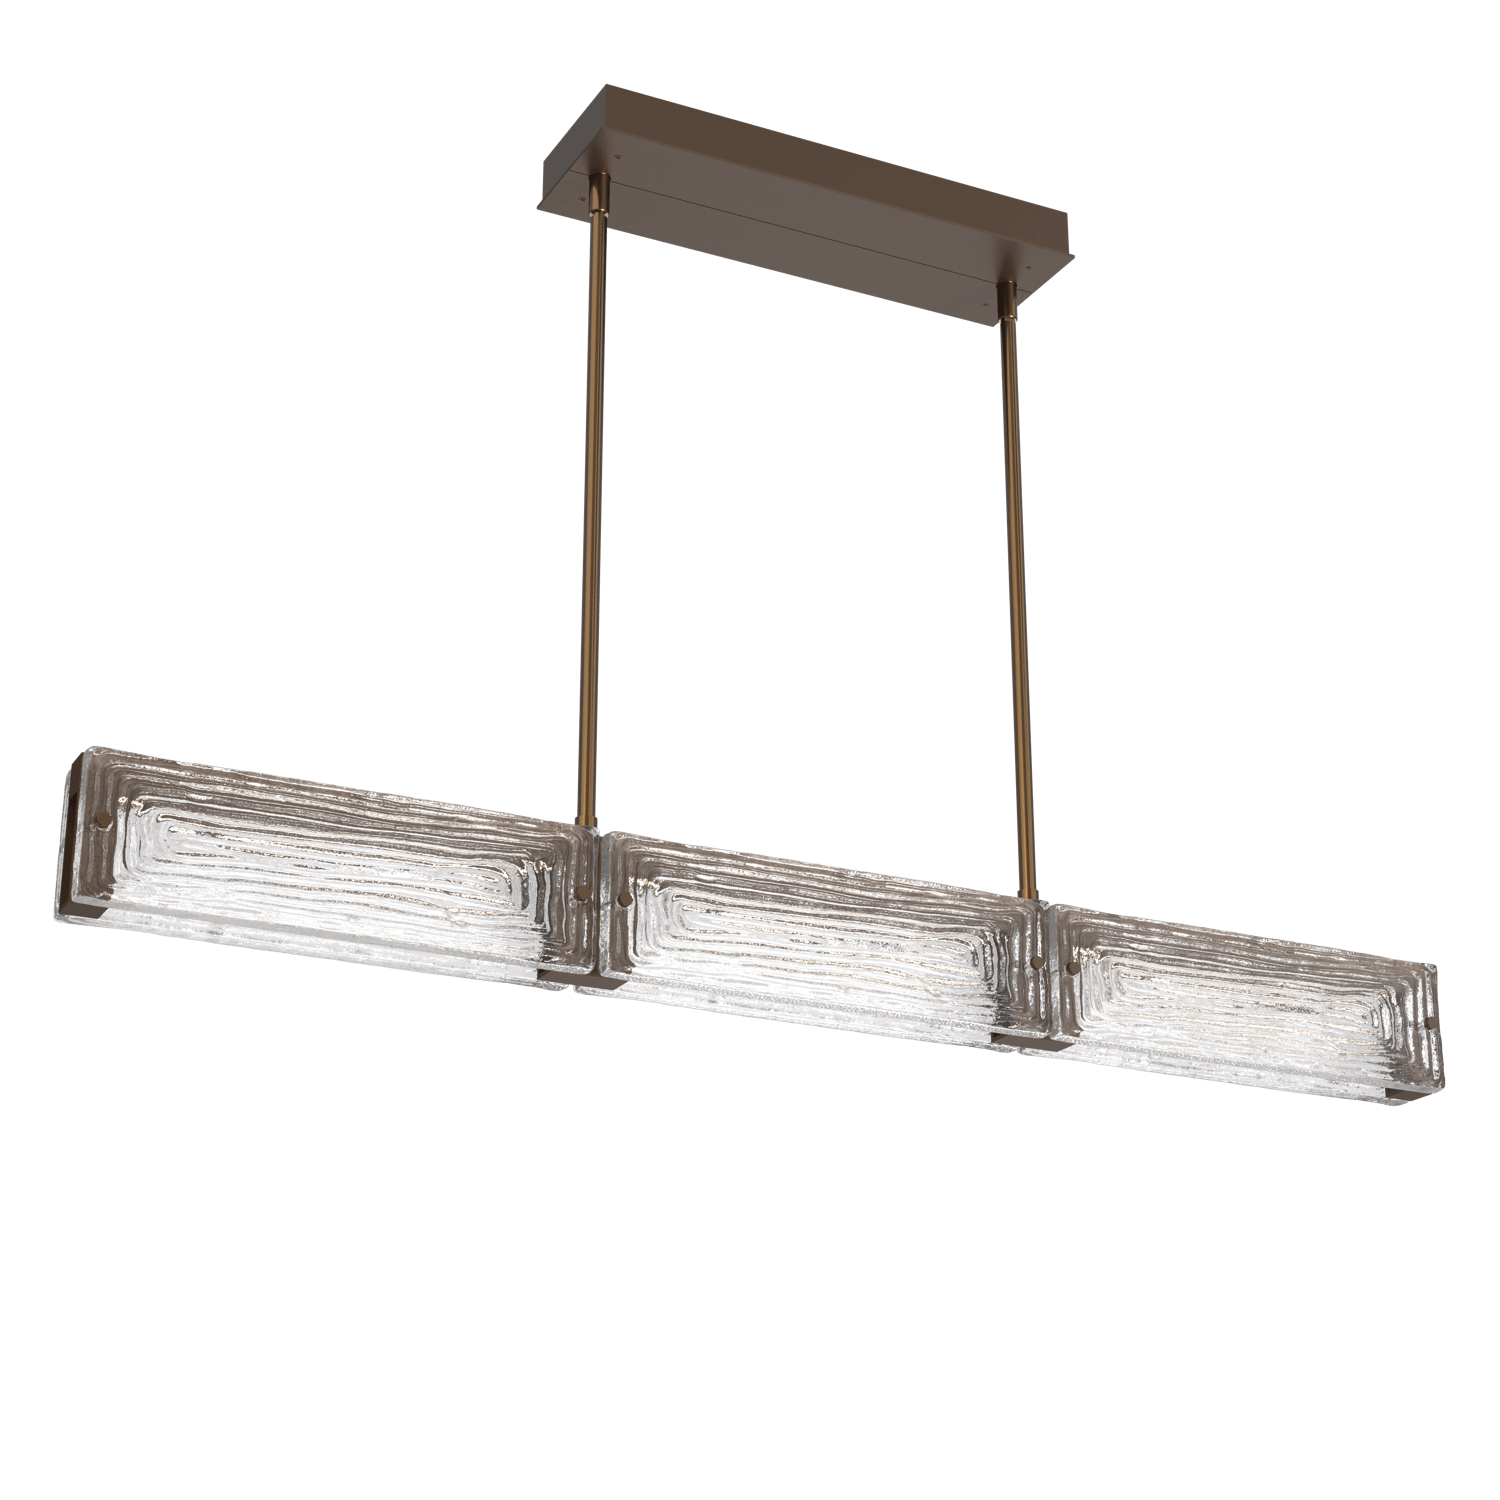 PLB0090-43-FB-TL-Hammerton-Studio-Tabulo-43-inch-linear-chandelier-with-flat-bronze-finish-and-clear-linea-cast-glass-shade-and-LED-lamping